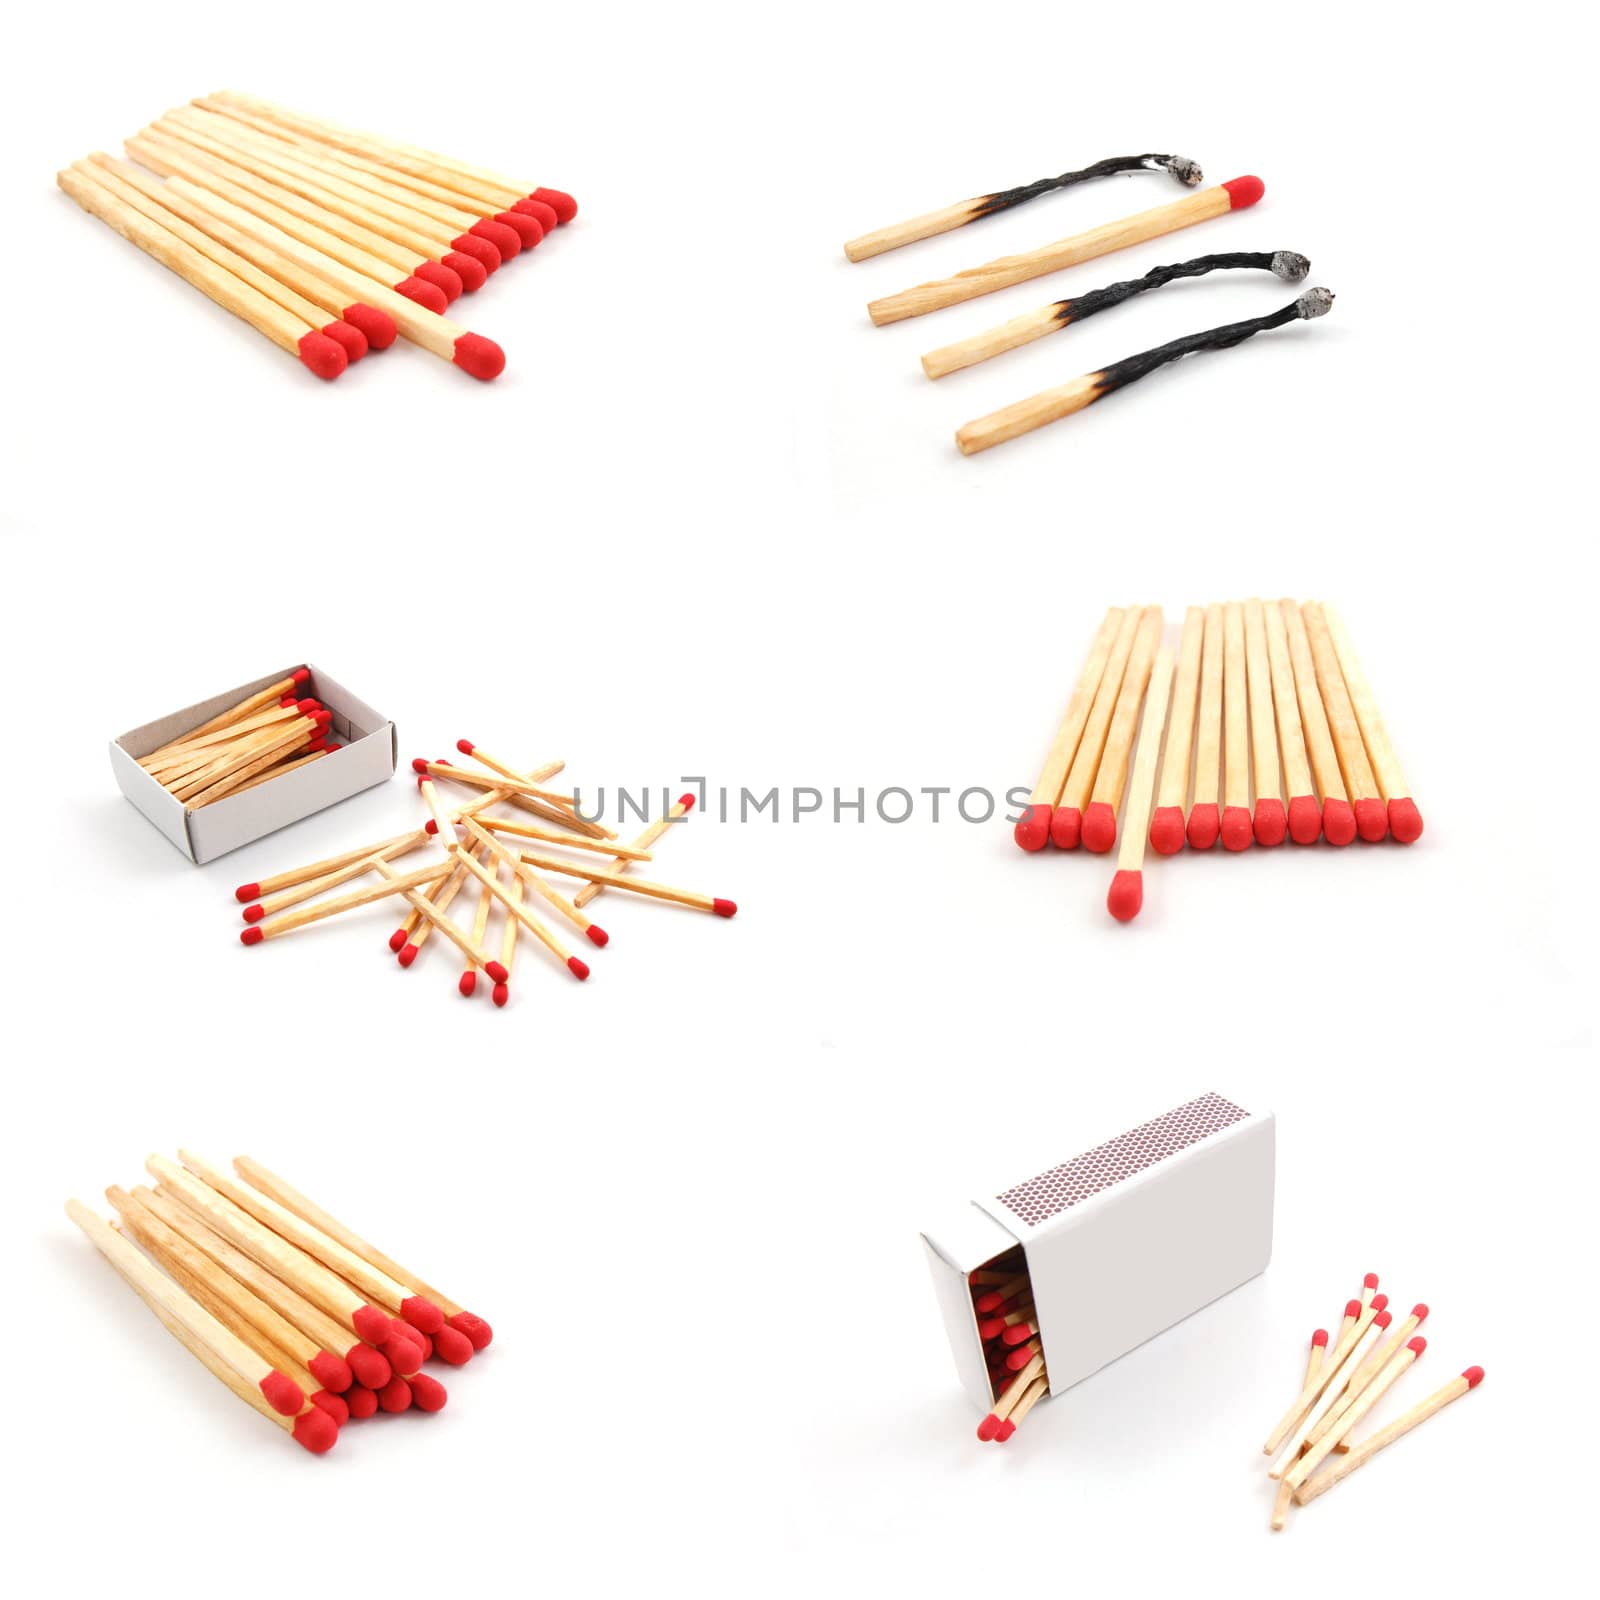 matches and matchbox collection isolated on white background